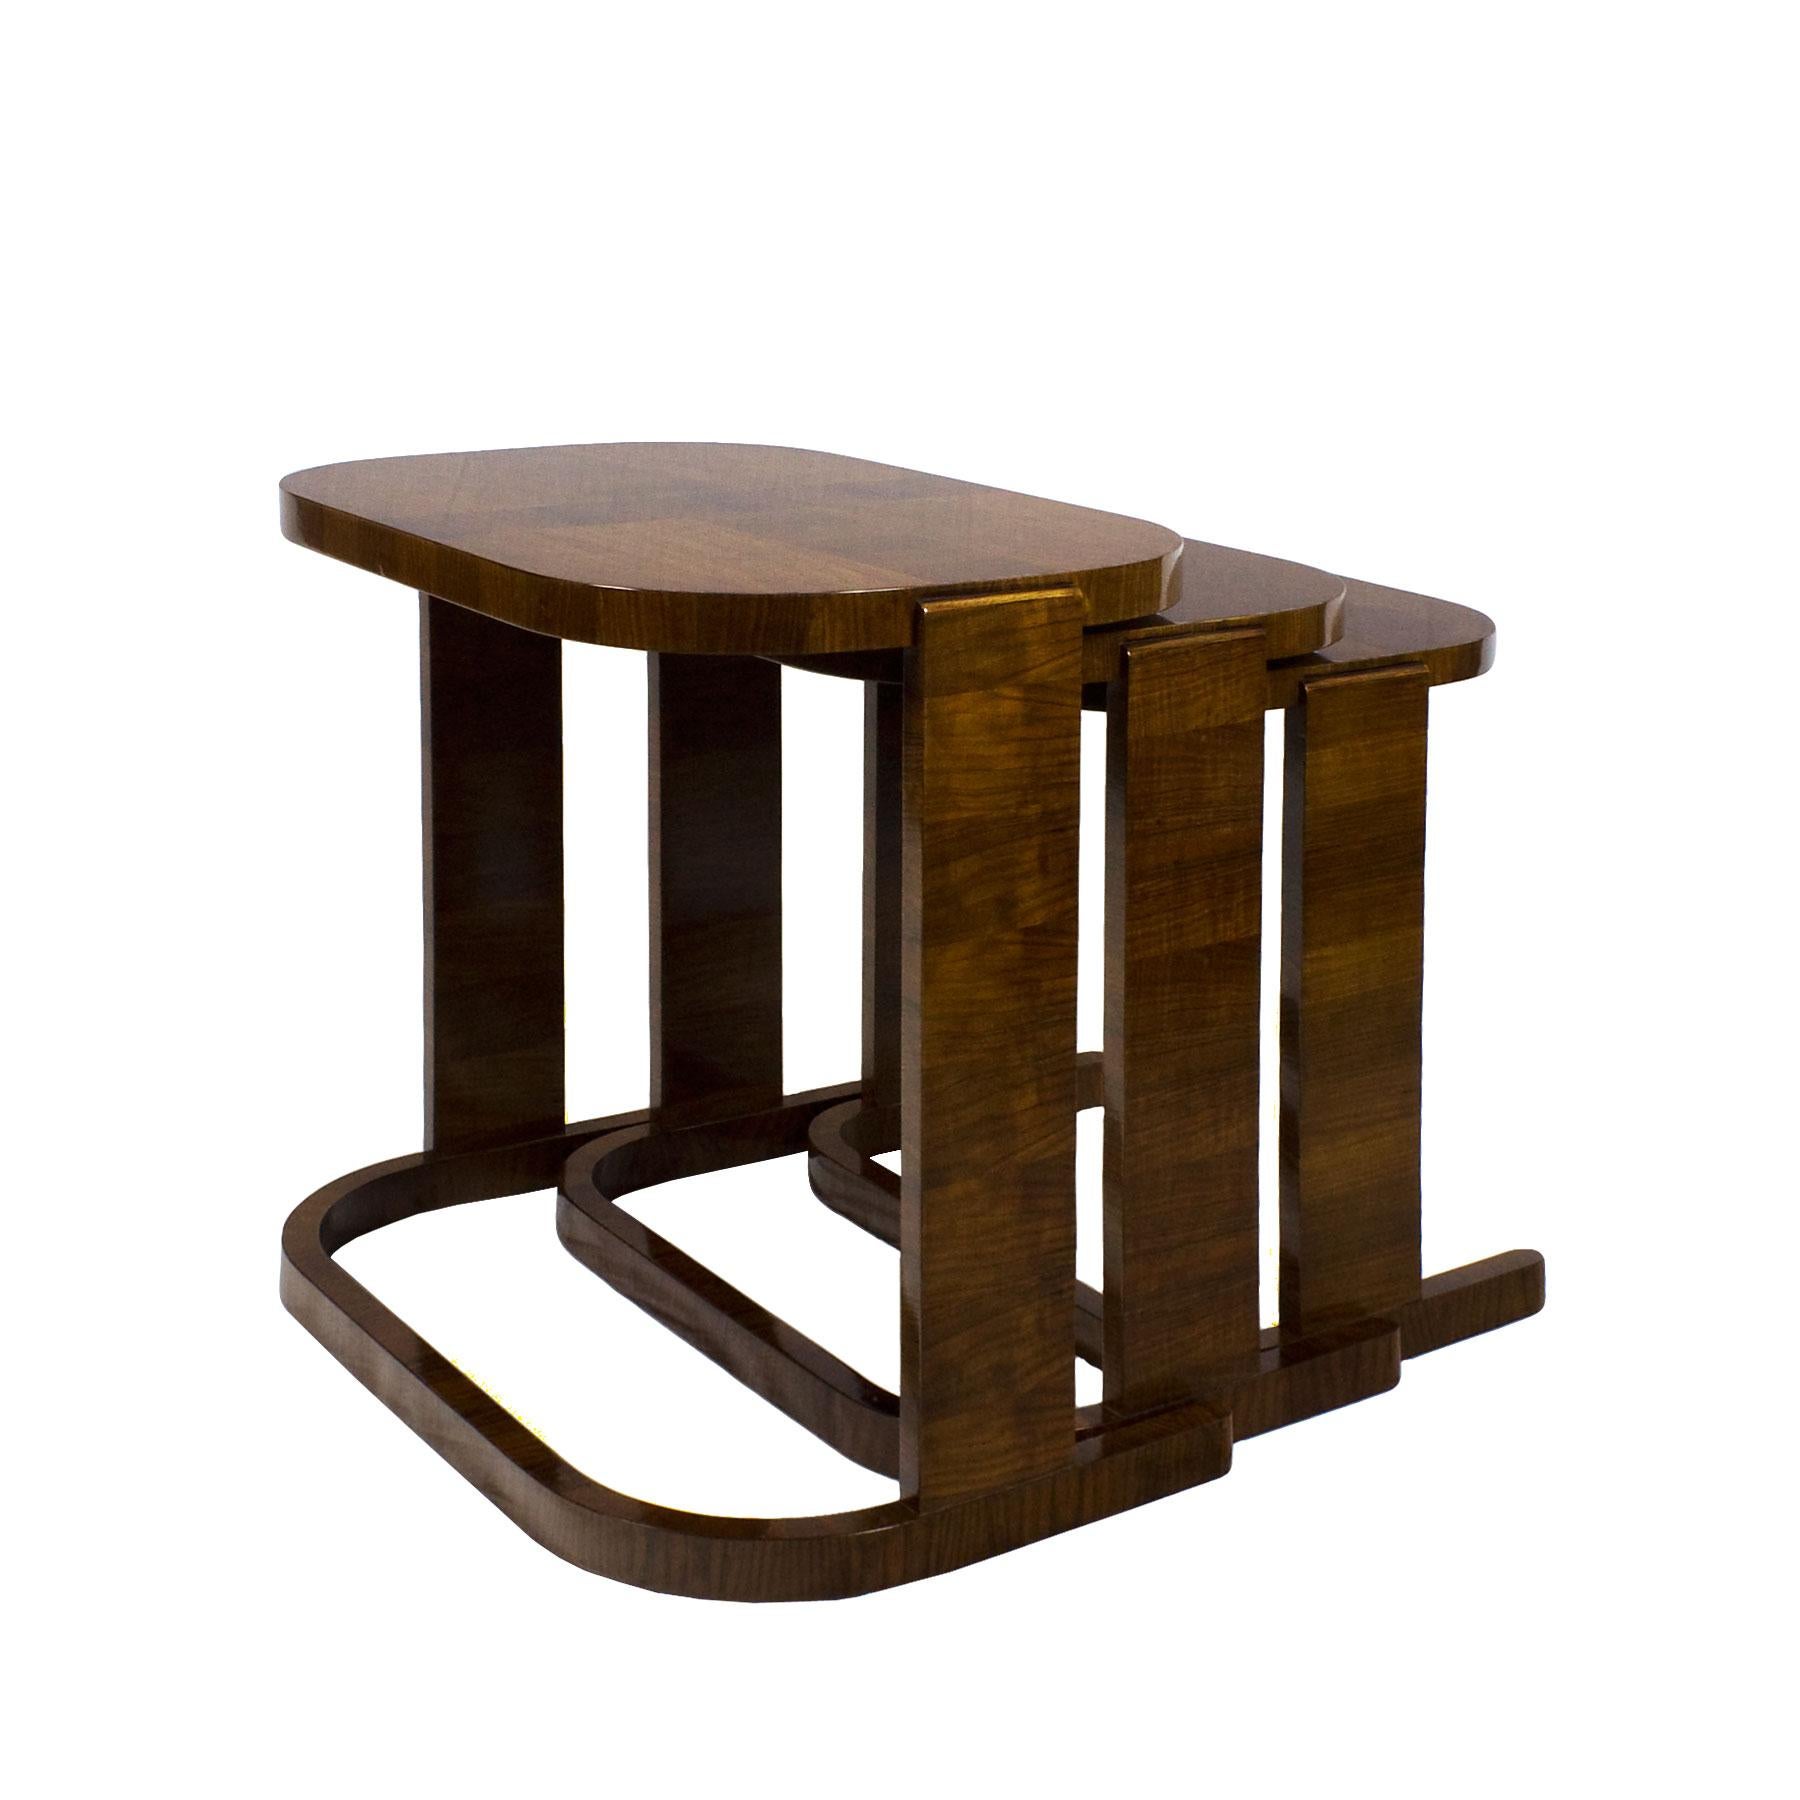 1935, Set of Three Art Deco Nesting Tables by De Coene Frères, Walnut - Belgium In Good Condition For Sale In Girona, ES